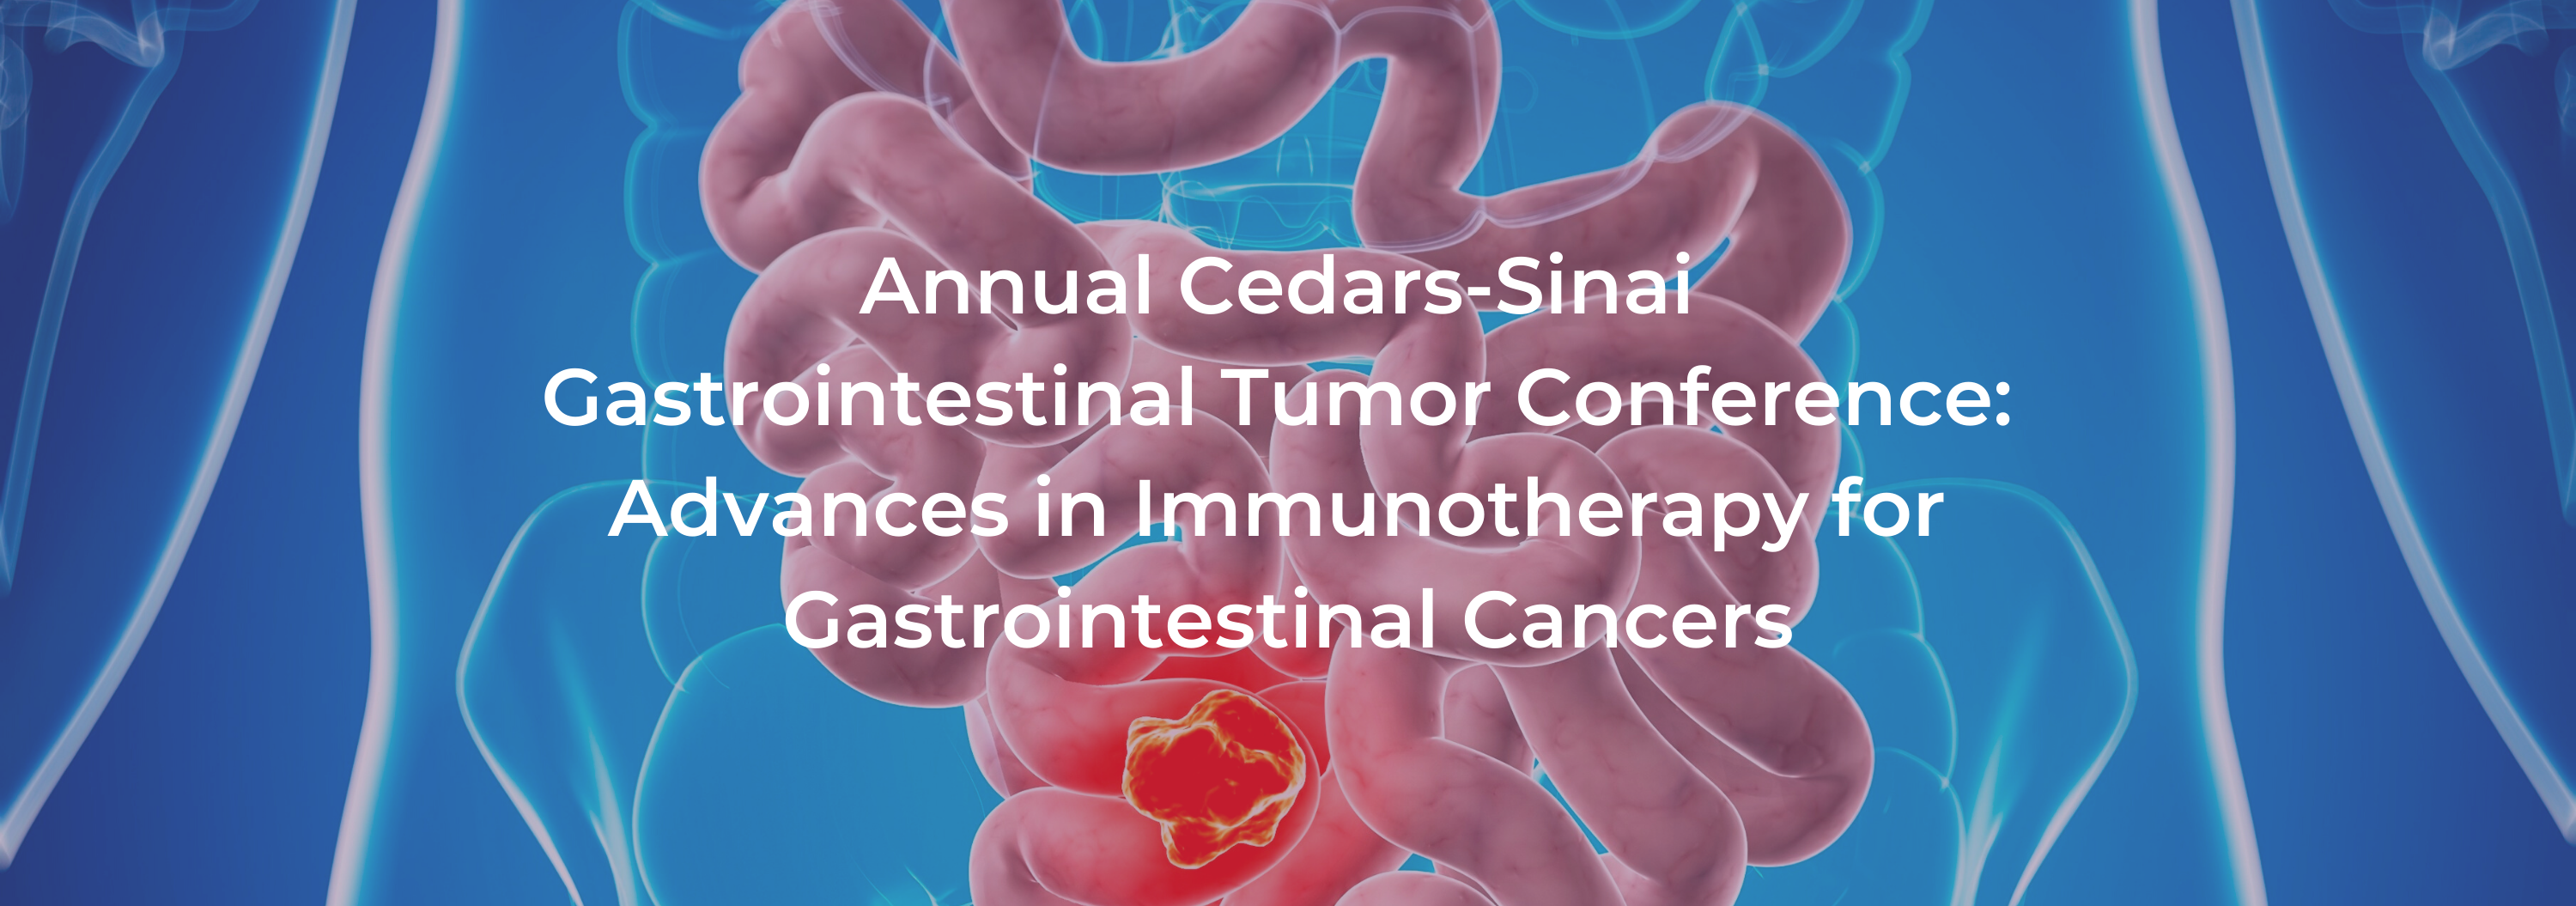 RESCHEDULED- 3rd Annual Cedars-Sinai Gastrointestinal Tumor Conference: Advances in Immunotherapy for Gastrointestinal Cancers Banner